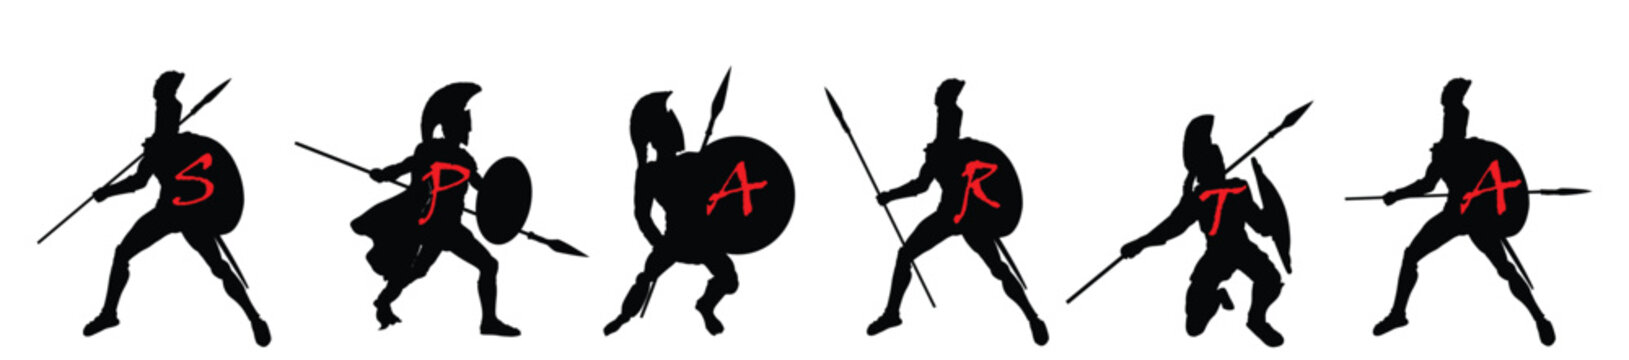 Greek hero ancient Sparta soldier Achilles with spear and shield in battle vector silhouette illustration isolated on background. Brave warrior Leonidas in combat against Persians empire symbol shape.